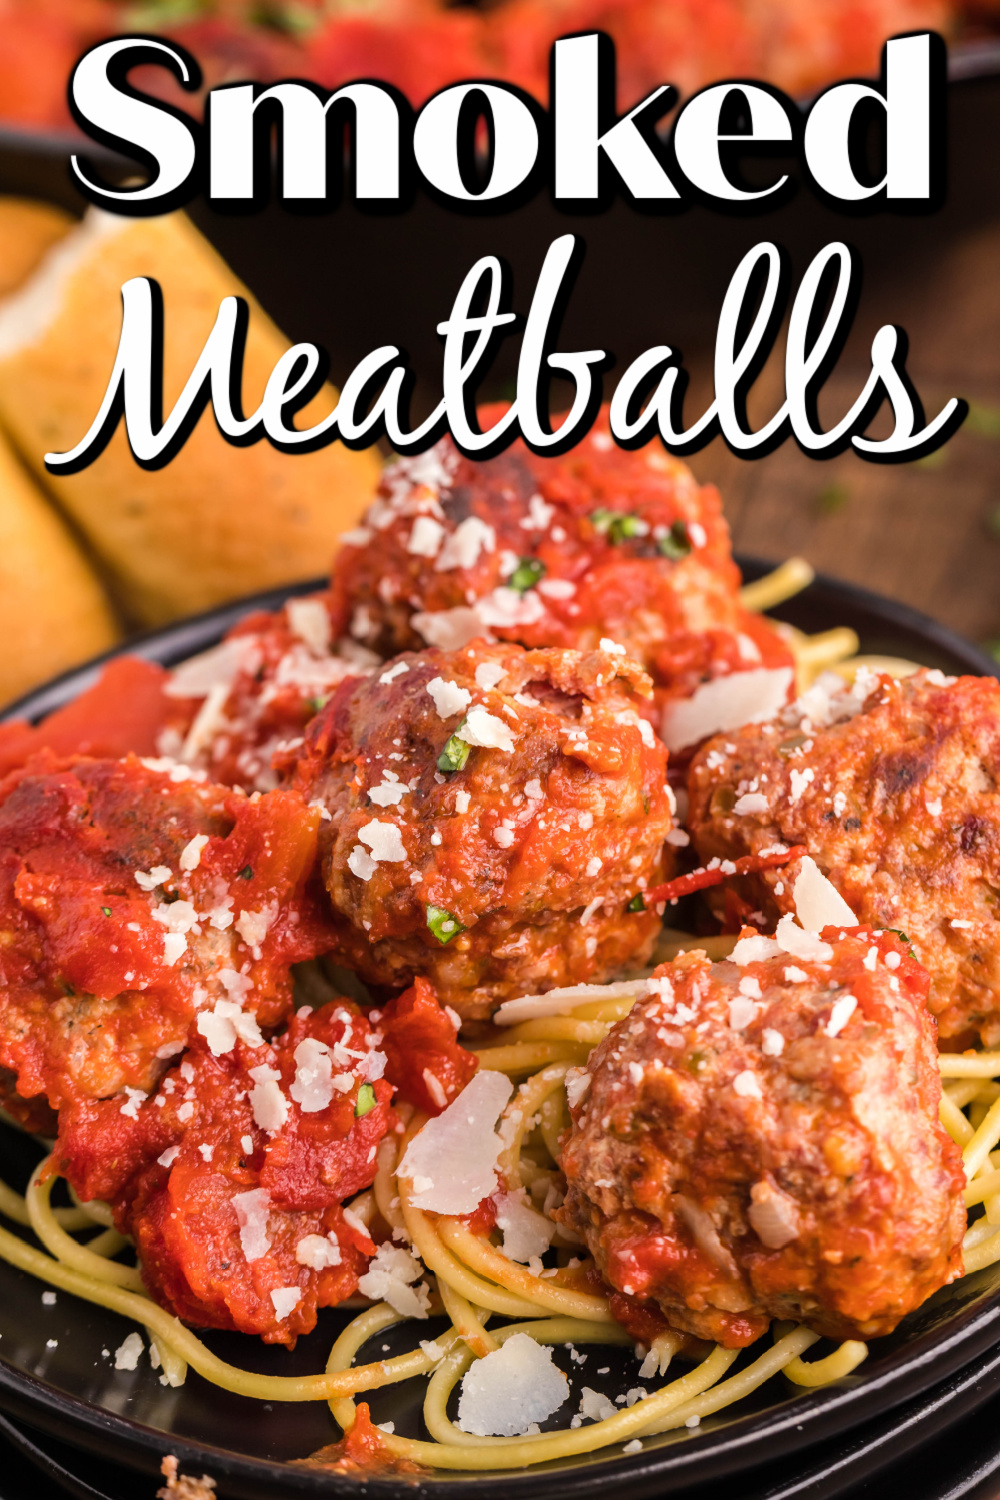 These smoked meatballs are full of amazing meatball flavor with a smoky flair that puts them over the top on taste!